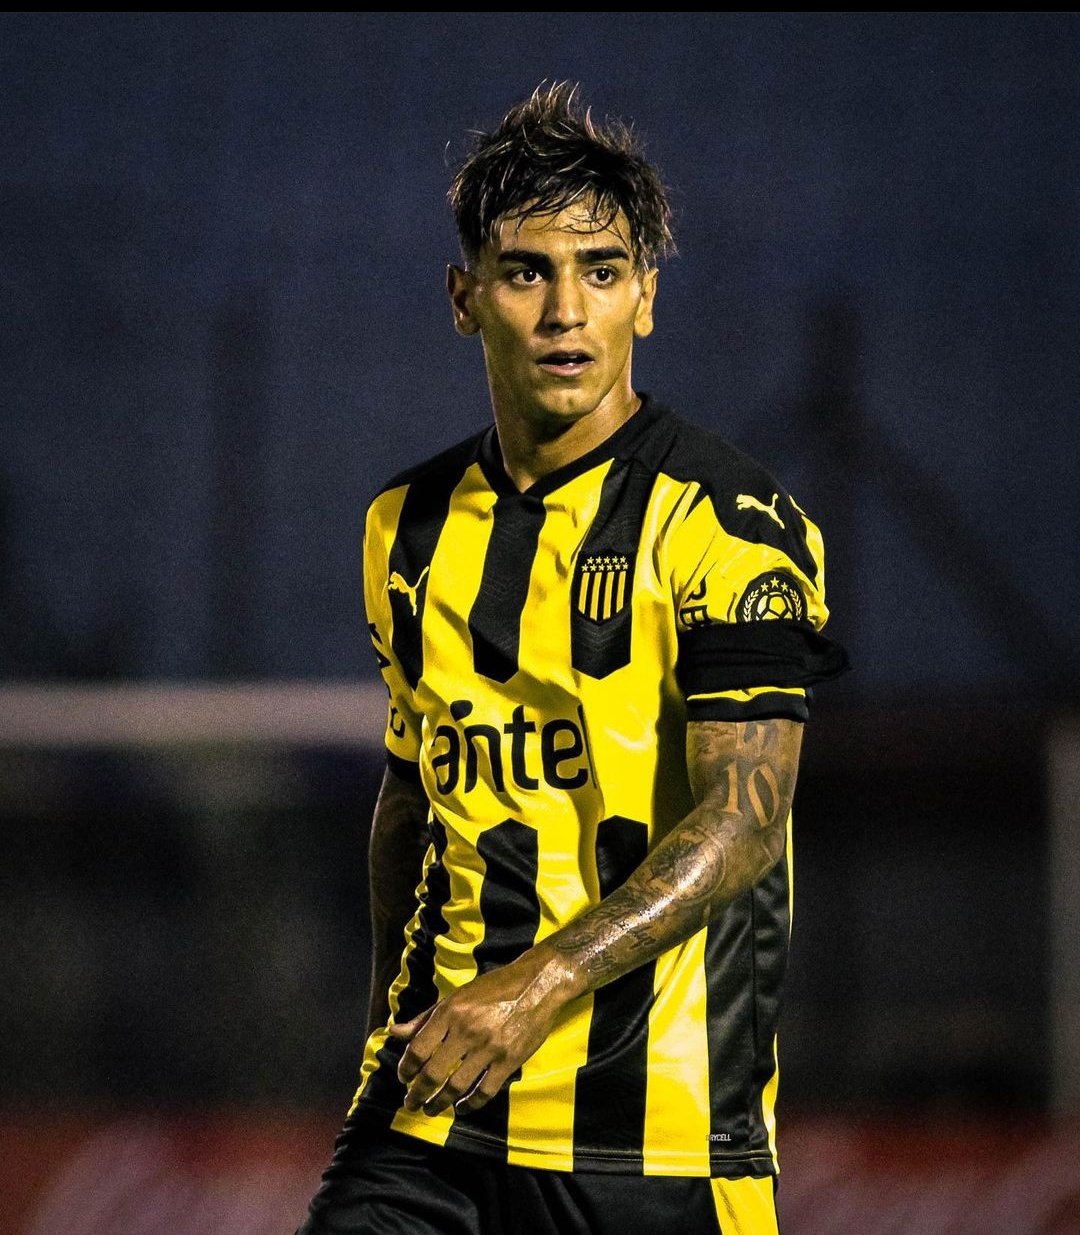 Tom Robinson Lyon Reportedly Interested In Facundo Torres The Latest Young Star Out Of Penarol The Year Old Forward Has A Release Clause Of Around 15mil T Co 8fgssc5i Twitter